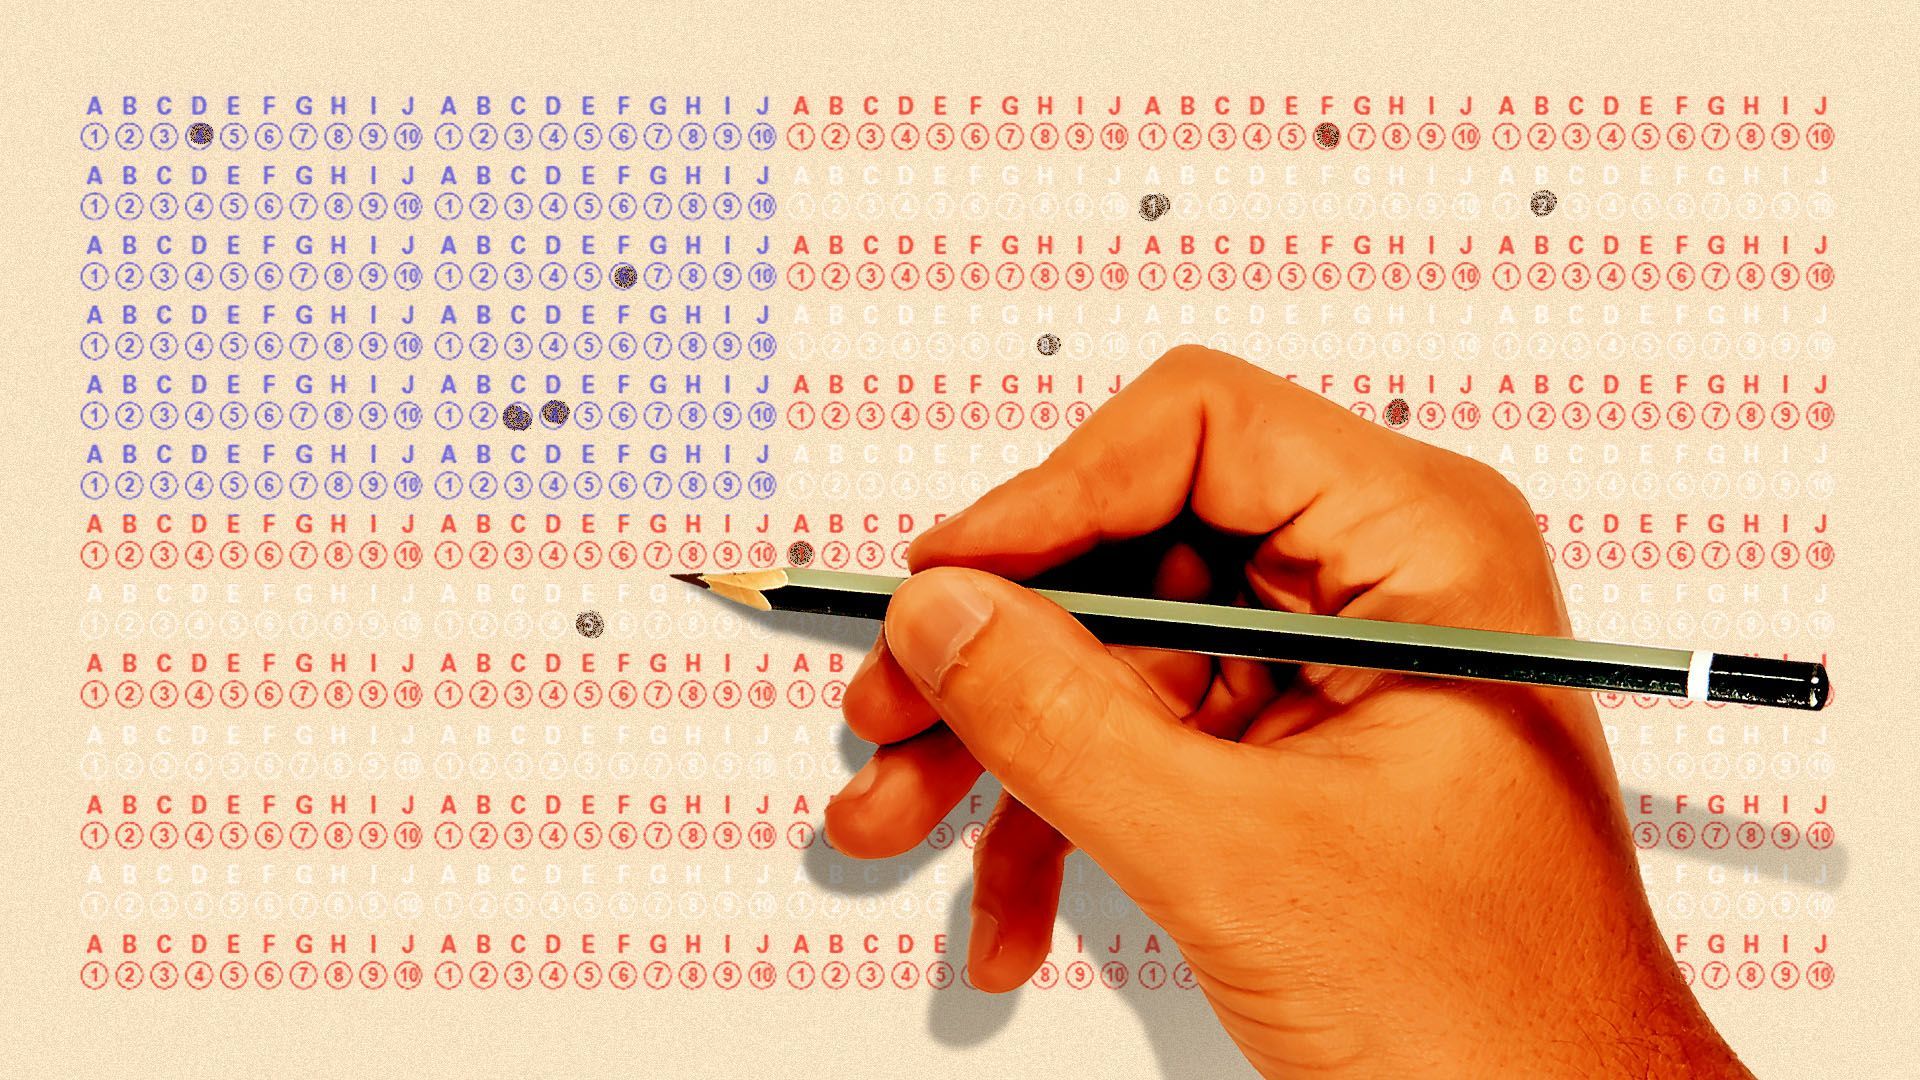 Illustration of someone taking a standardized test in the shape of the American flag